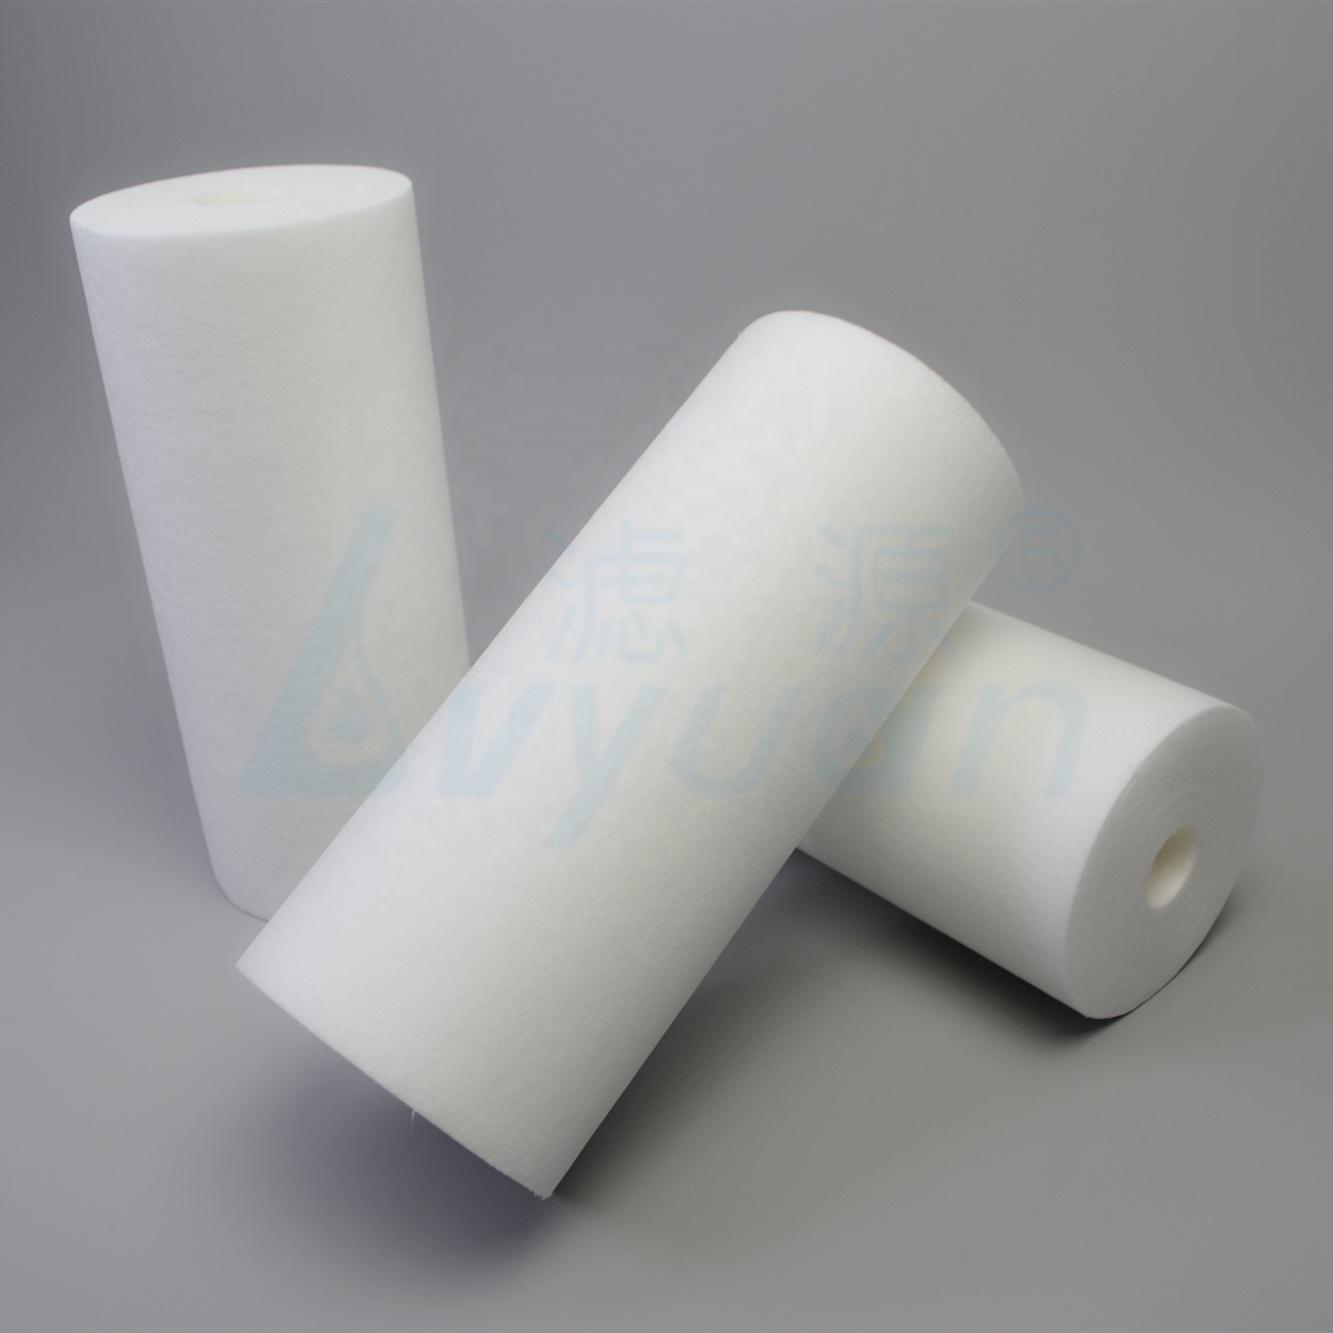 Water Filtration Double precision melt blown Filter Cartridge pp filter for filtering sediment with 1 3 5 micron